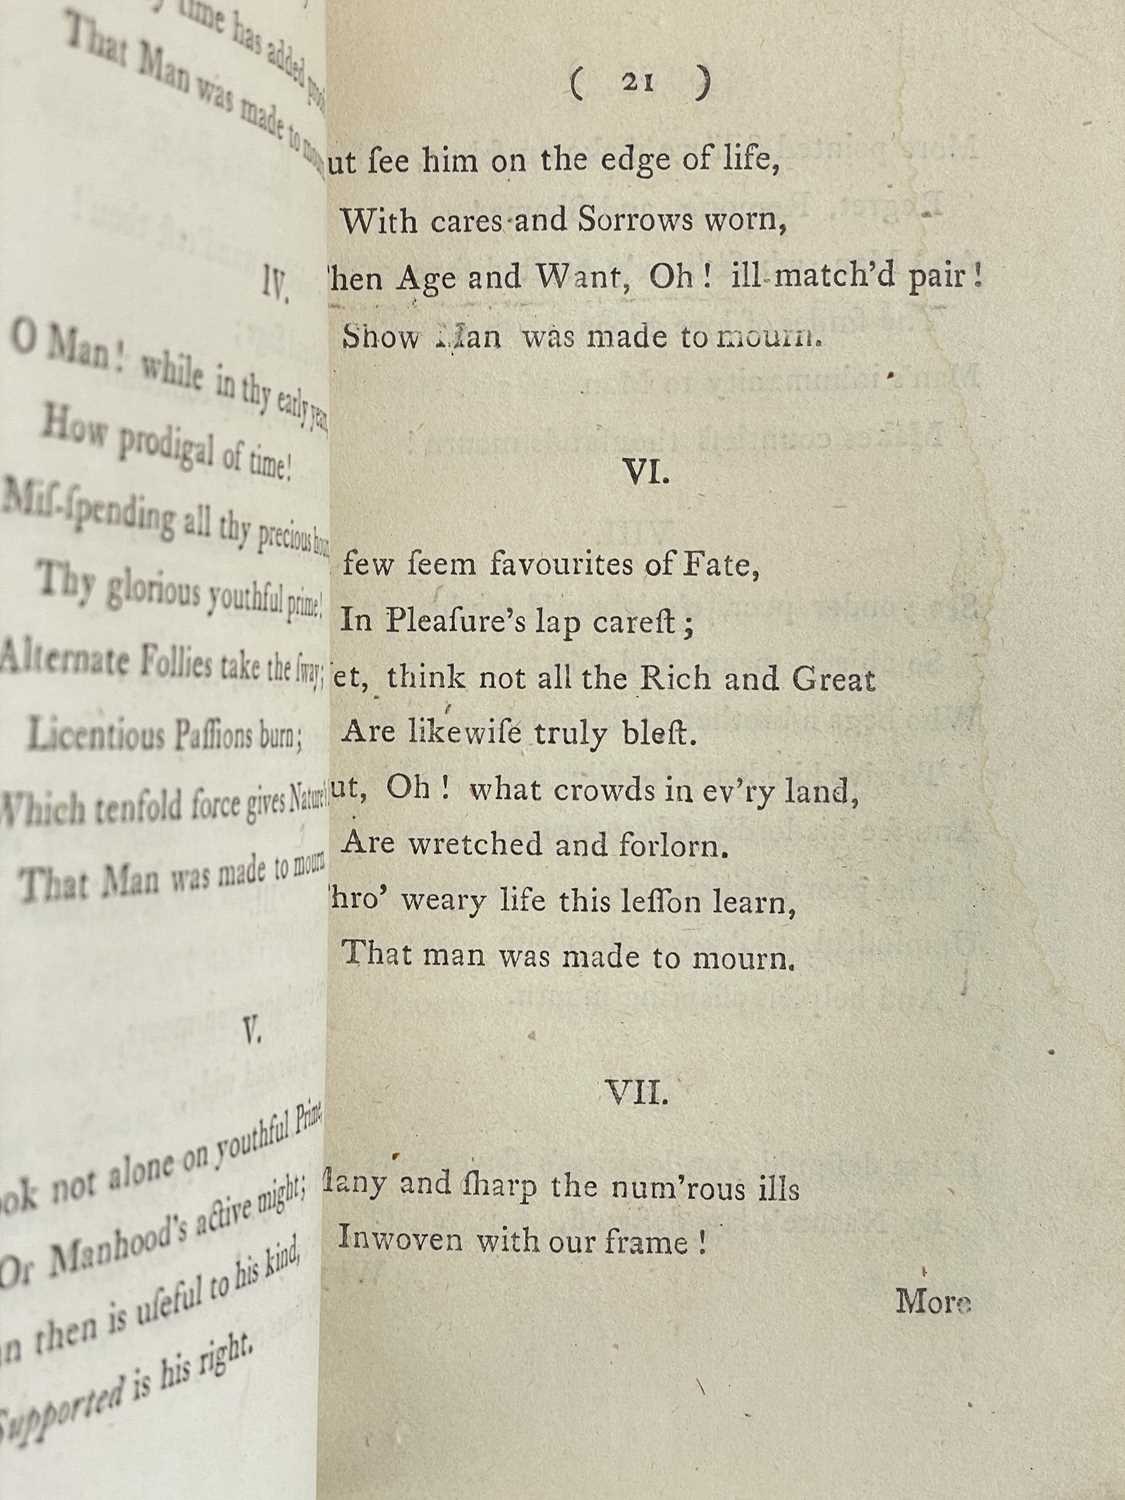 BURNS, Robert 'Poems Chiefly in the Scottish Dialect' - Image 6 of 10